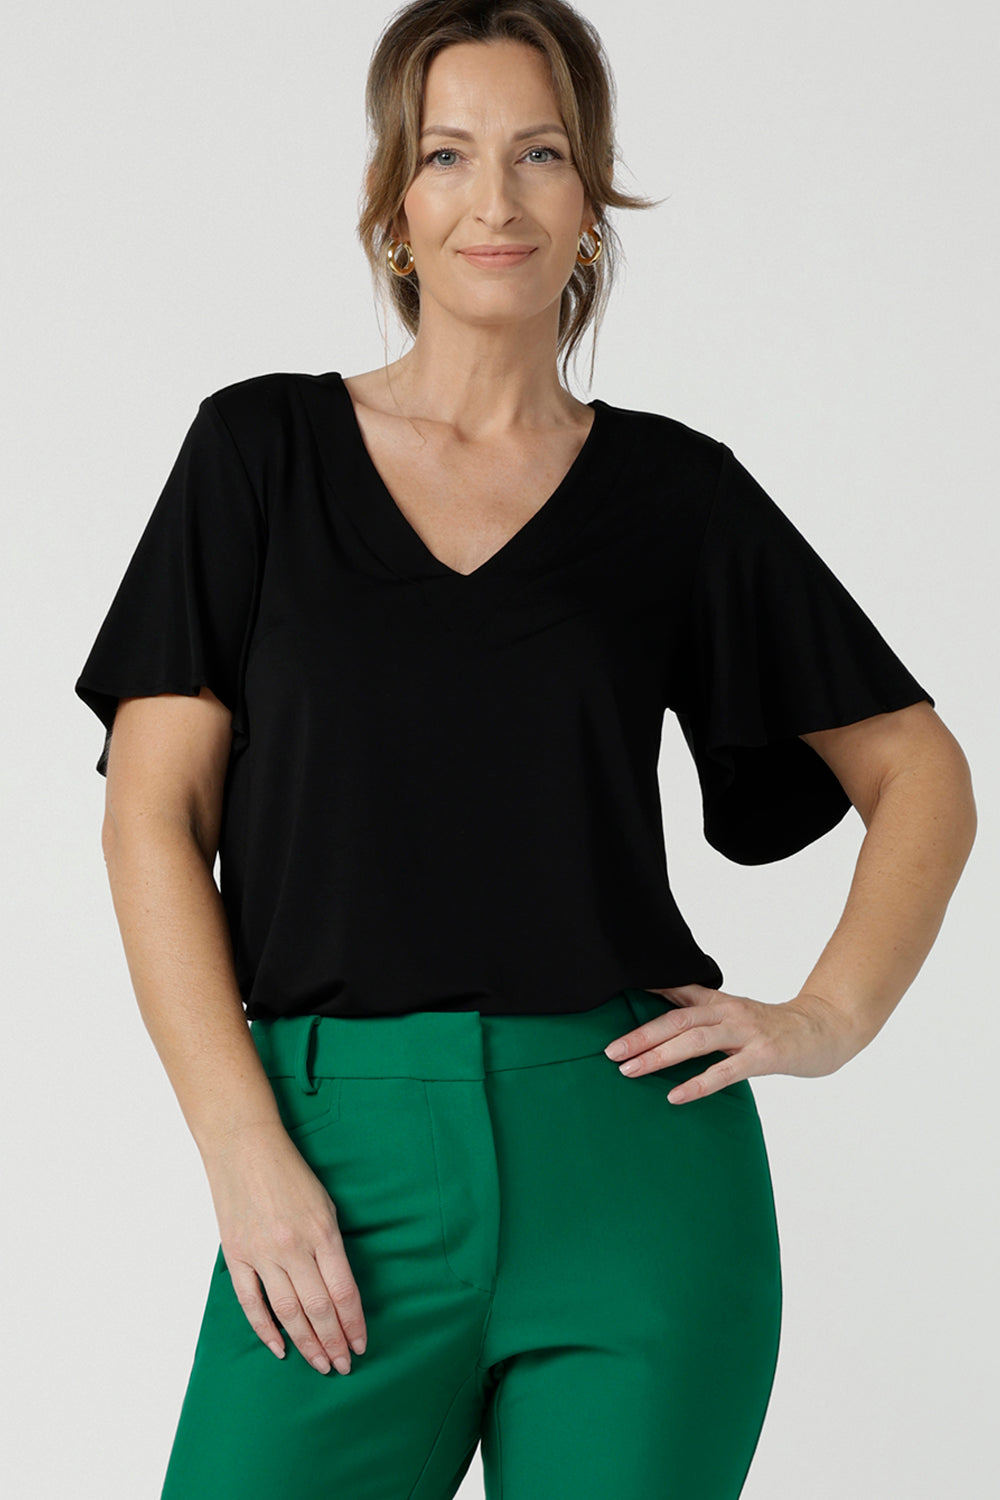 A flutter sleeve, black top for work and casual wear, this tailored top is worn by a size 10, 40 plus woman. Made in Australia, shop women's black tops online at Australian and New Zealand women's clothing brand, Leina & Fleur.